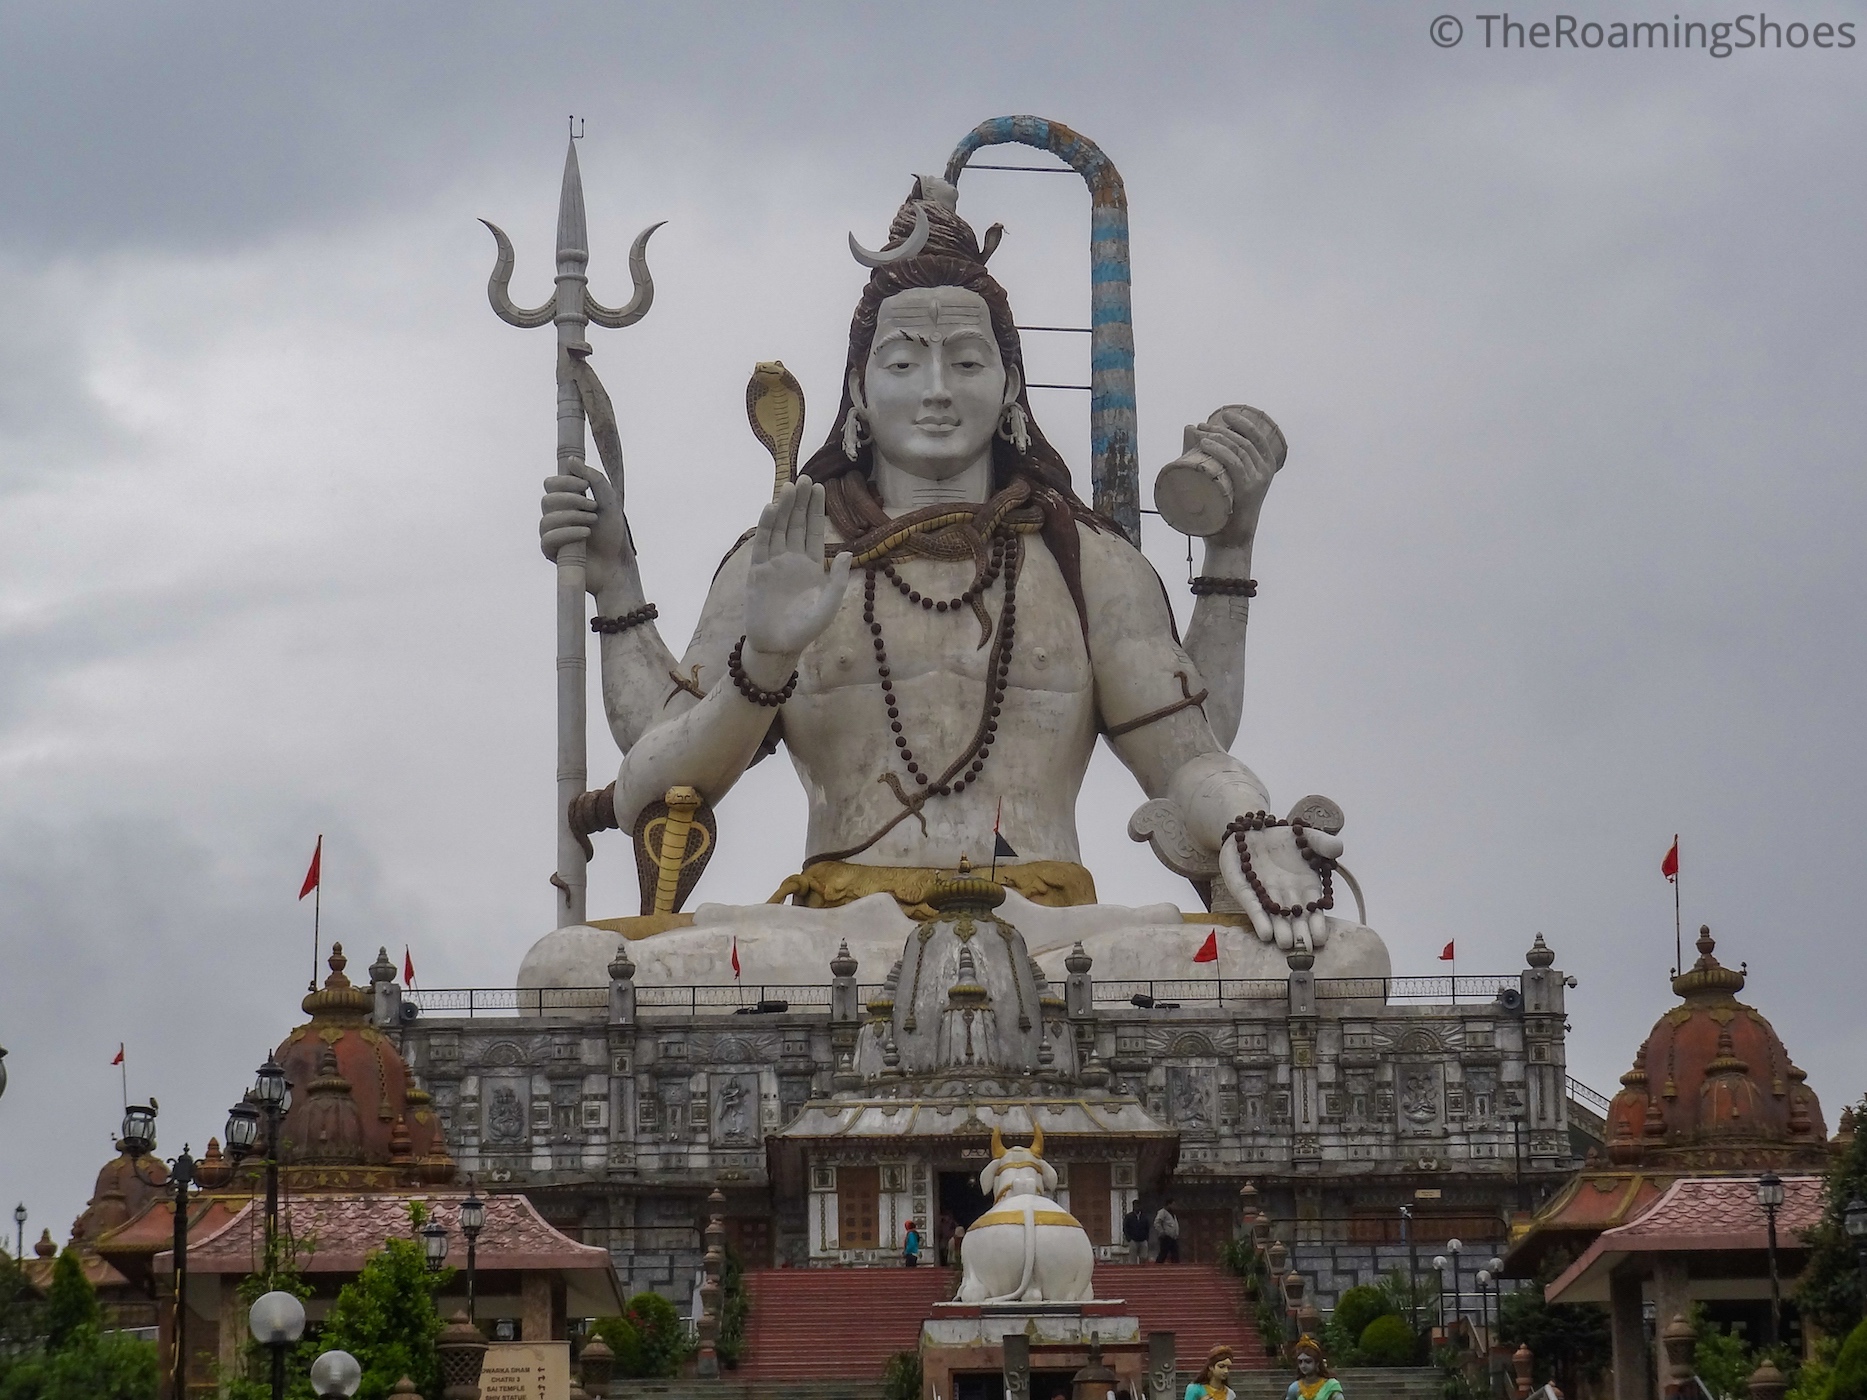 Lord Shiva's statue at Char Dham